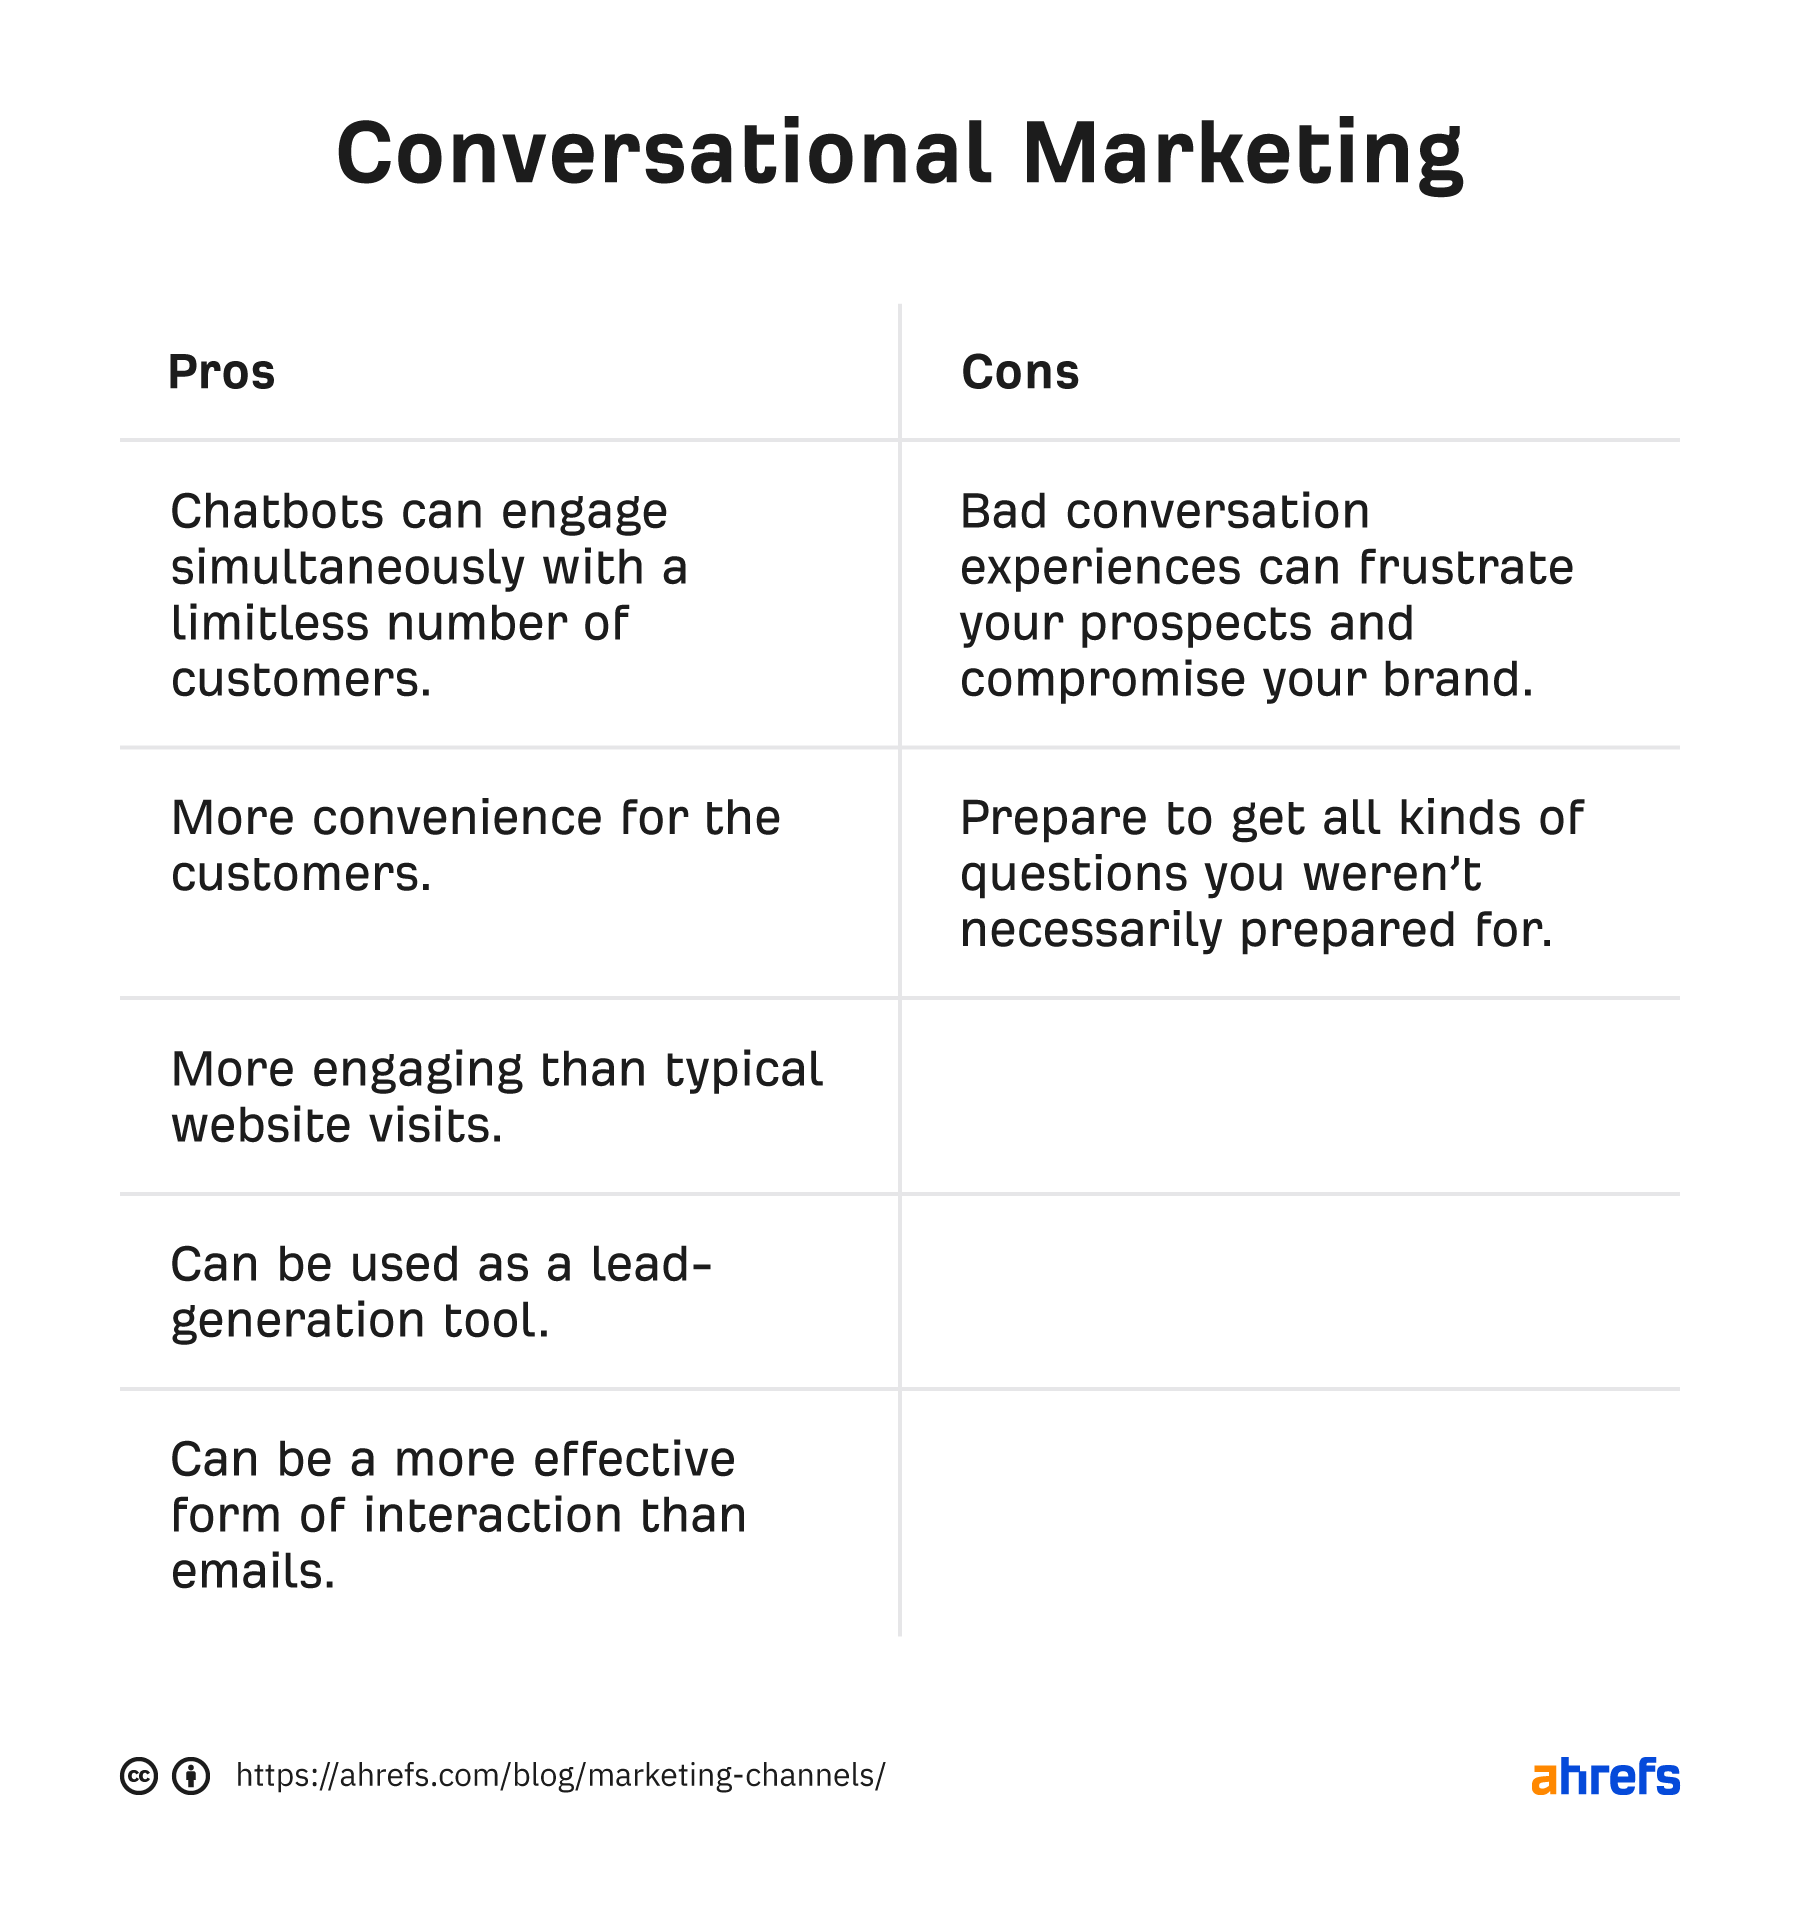 Pros and cons of conversational marketing